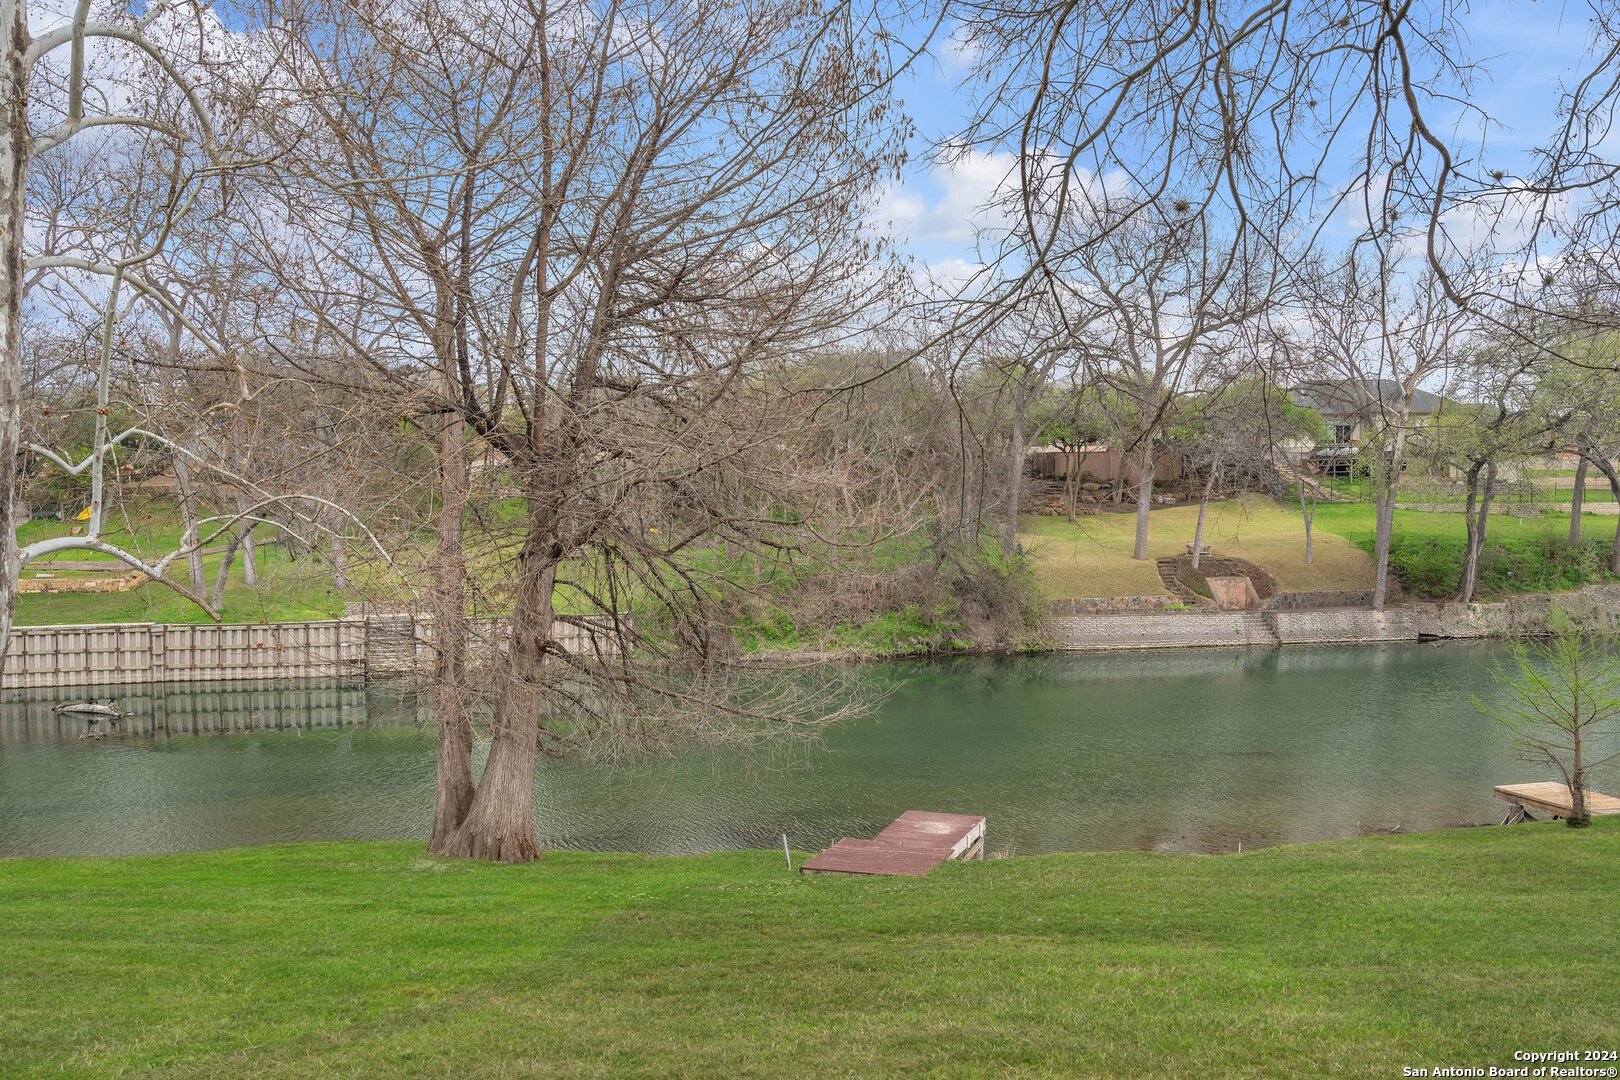 a view of a lake with a yard and a large tree